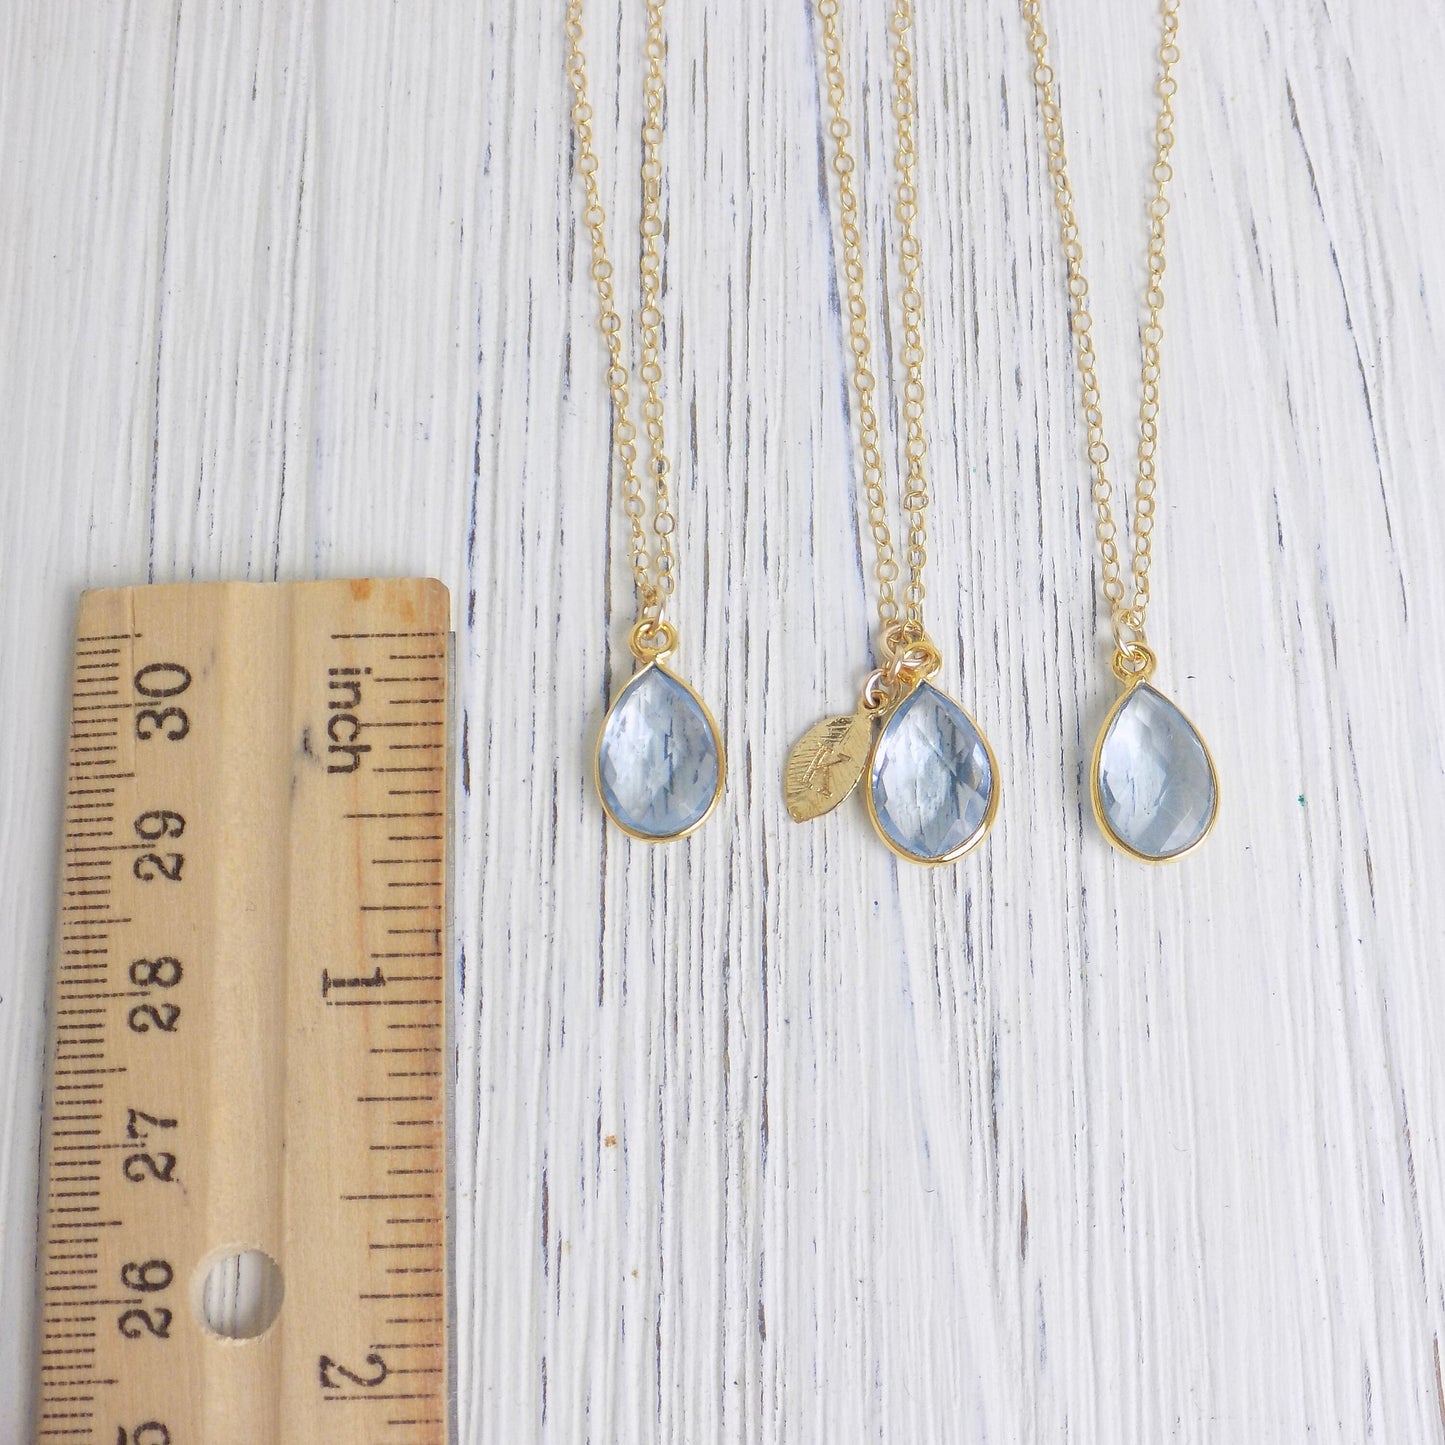 March Birthstone Aquamarine Necklace with Personalized Initial Charm on 14K Gold Filled Chain, Light Blue Crystal Pendant, M5-347